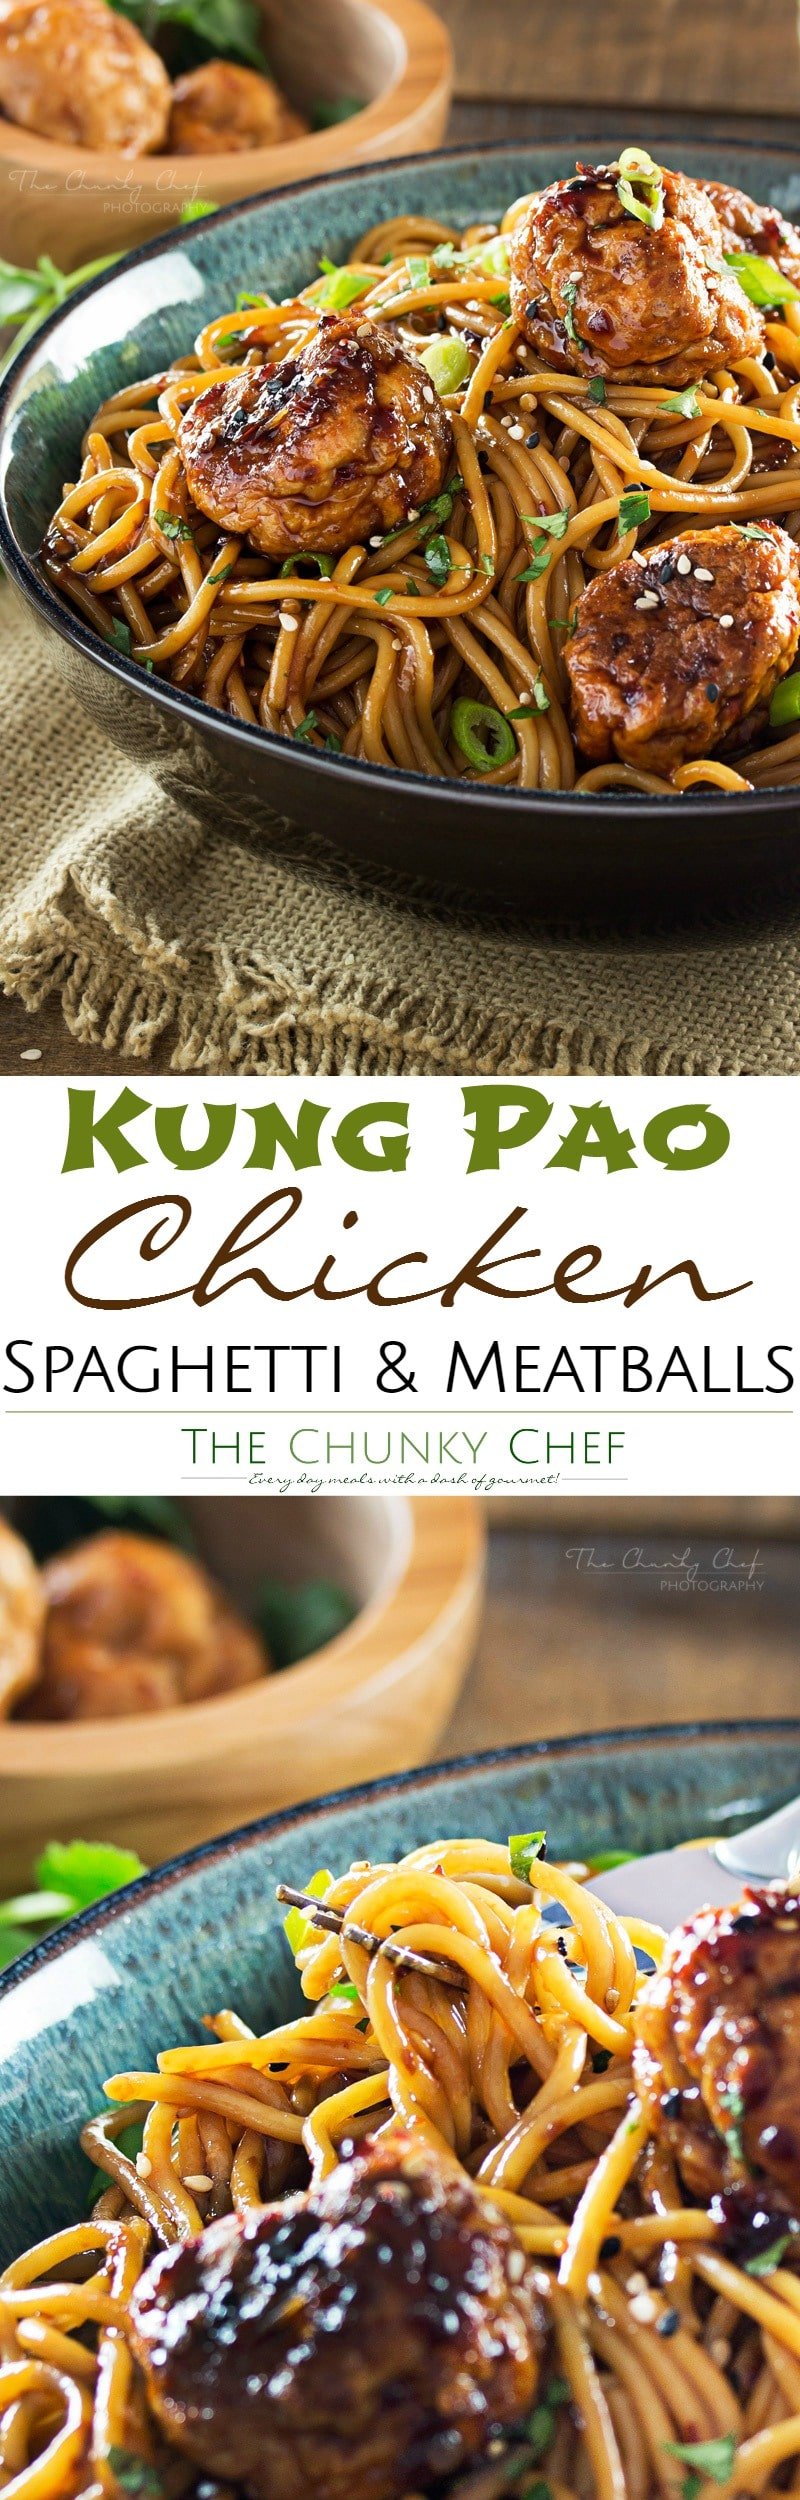 Kung-Pao-Chicken-Spaghetti-and-Meatballs | This version of Kung Pao chicken has all the flavors you'd expect from the classic dish, but in a comforting, homestyle spaghetti and meatballs package! | http://thechunkychef.com